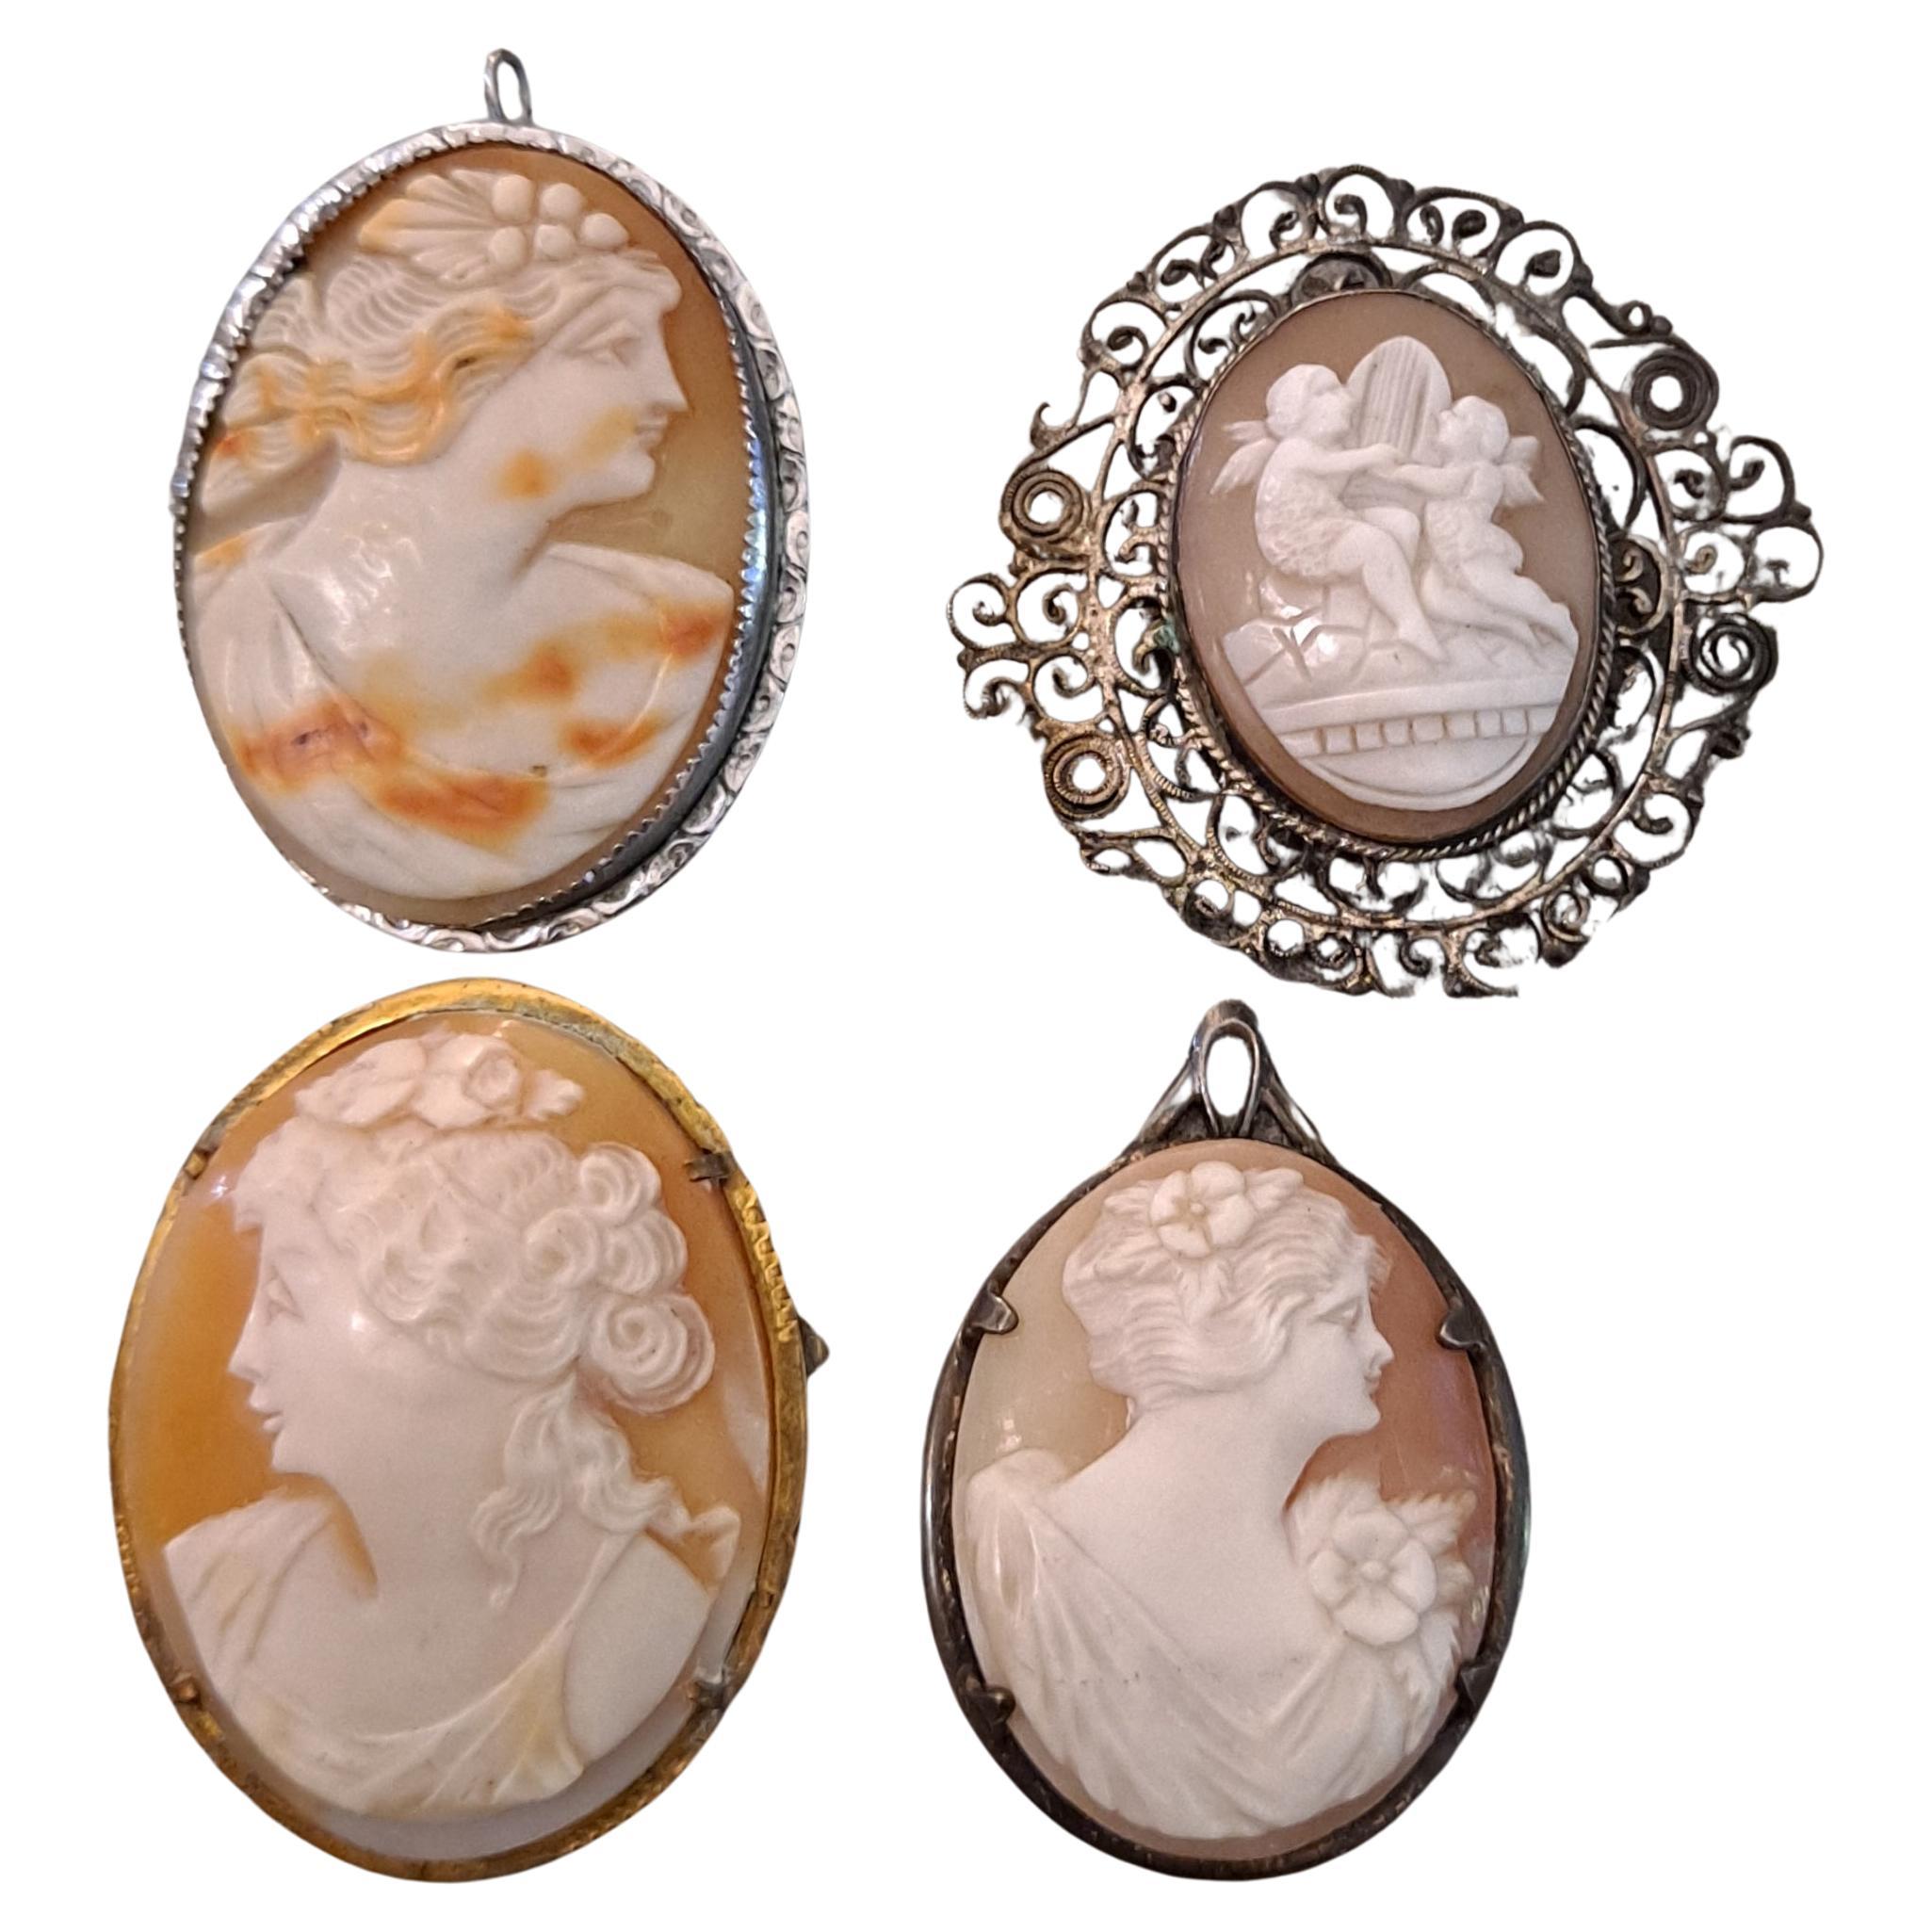 Group of 4 High Relief Cameo Pins/Pendents Carved from Bull Mouth Shell   For Sale